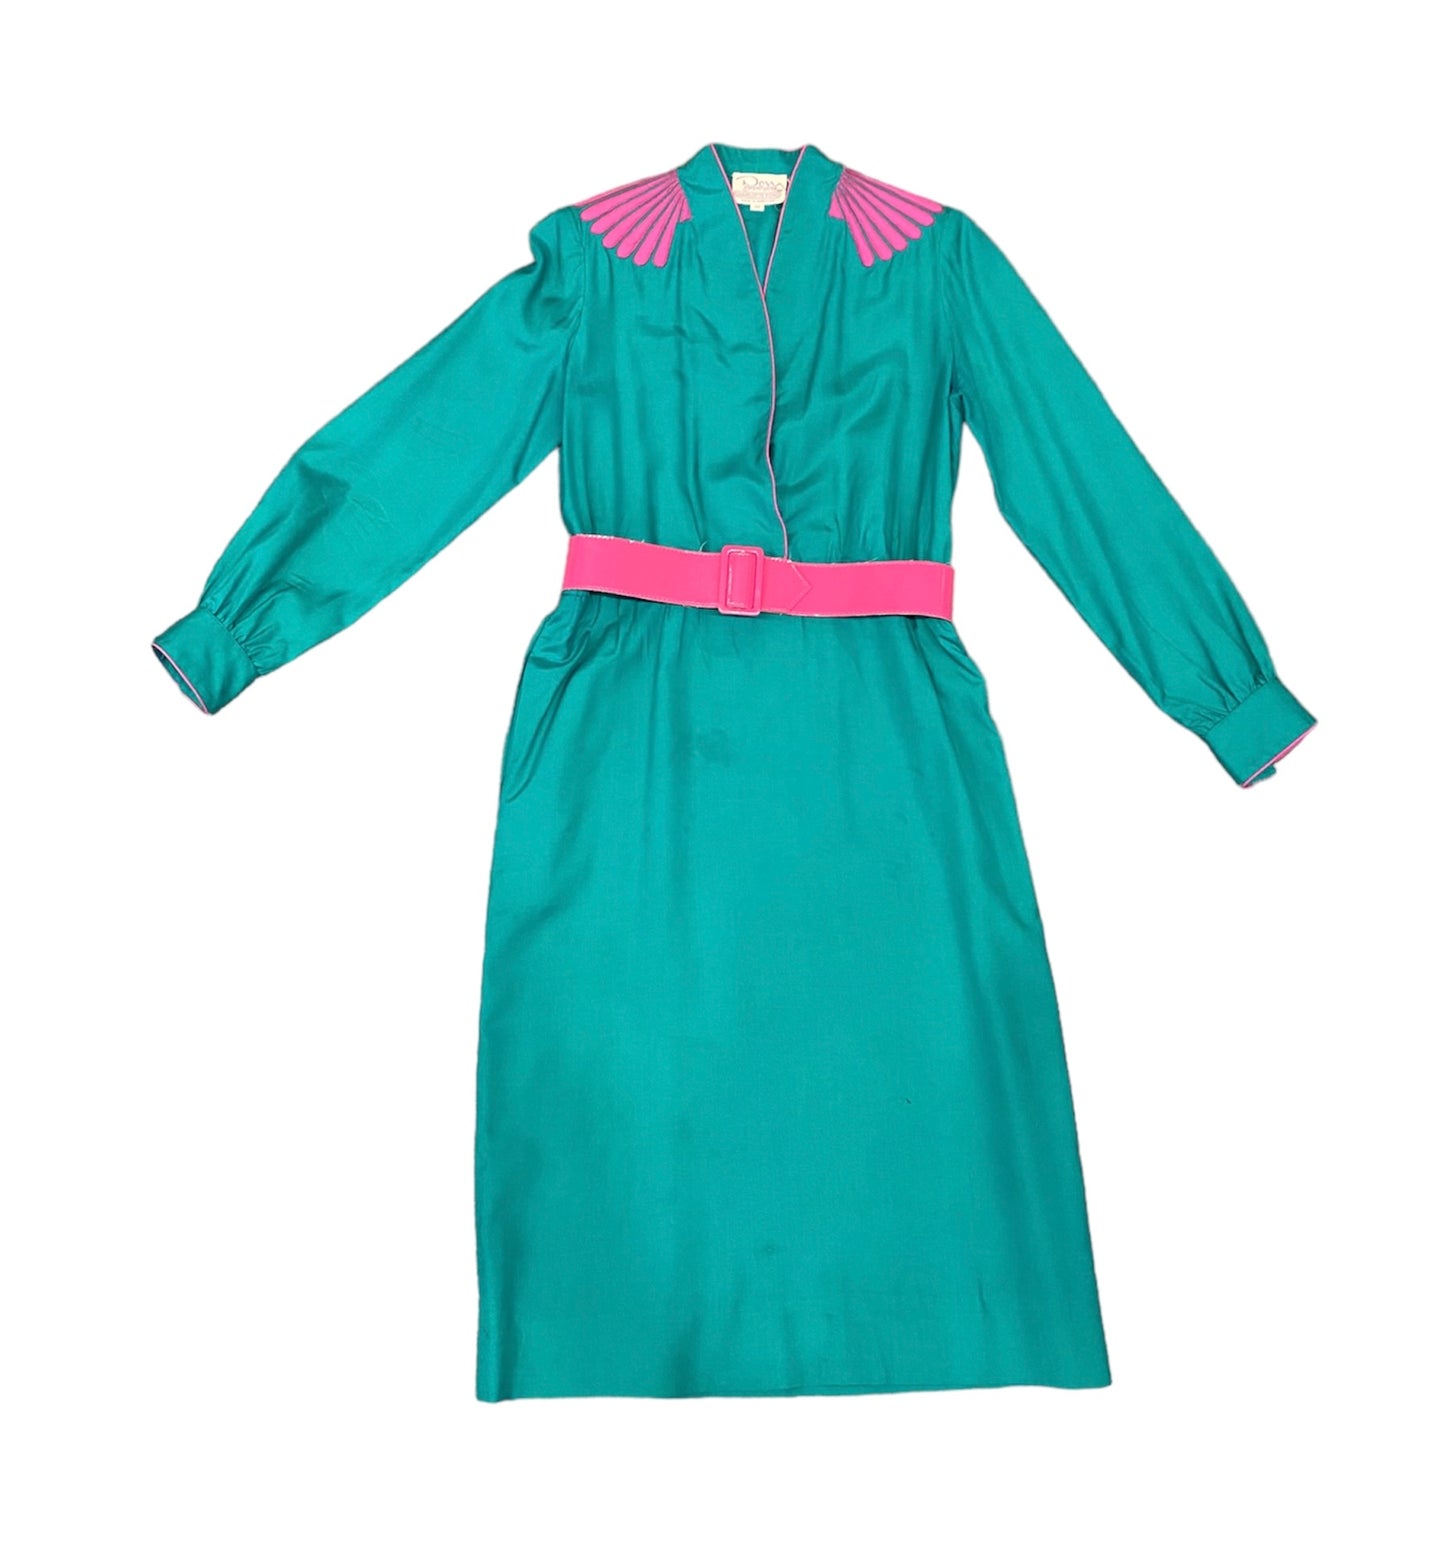 80s Fab Teal & Pink Silk Dress by Don Sophisticates